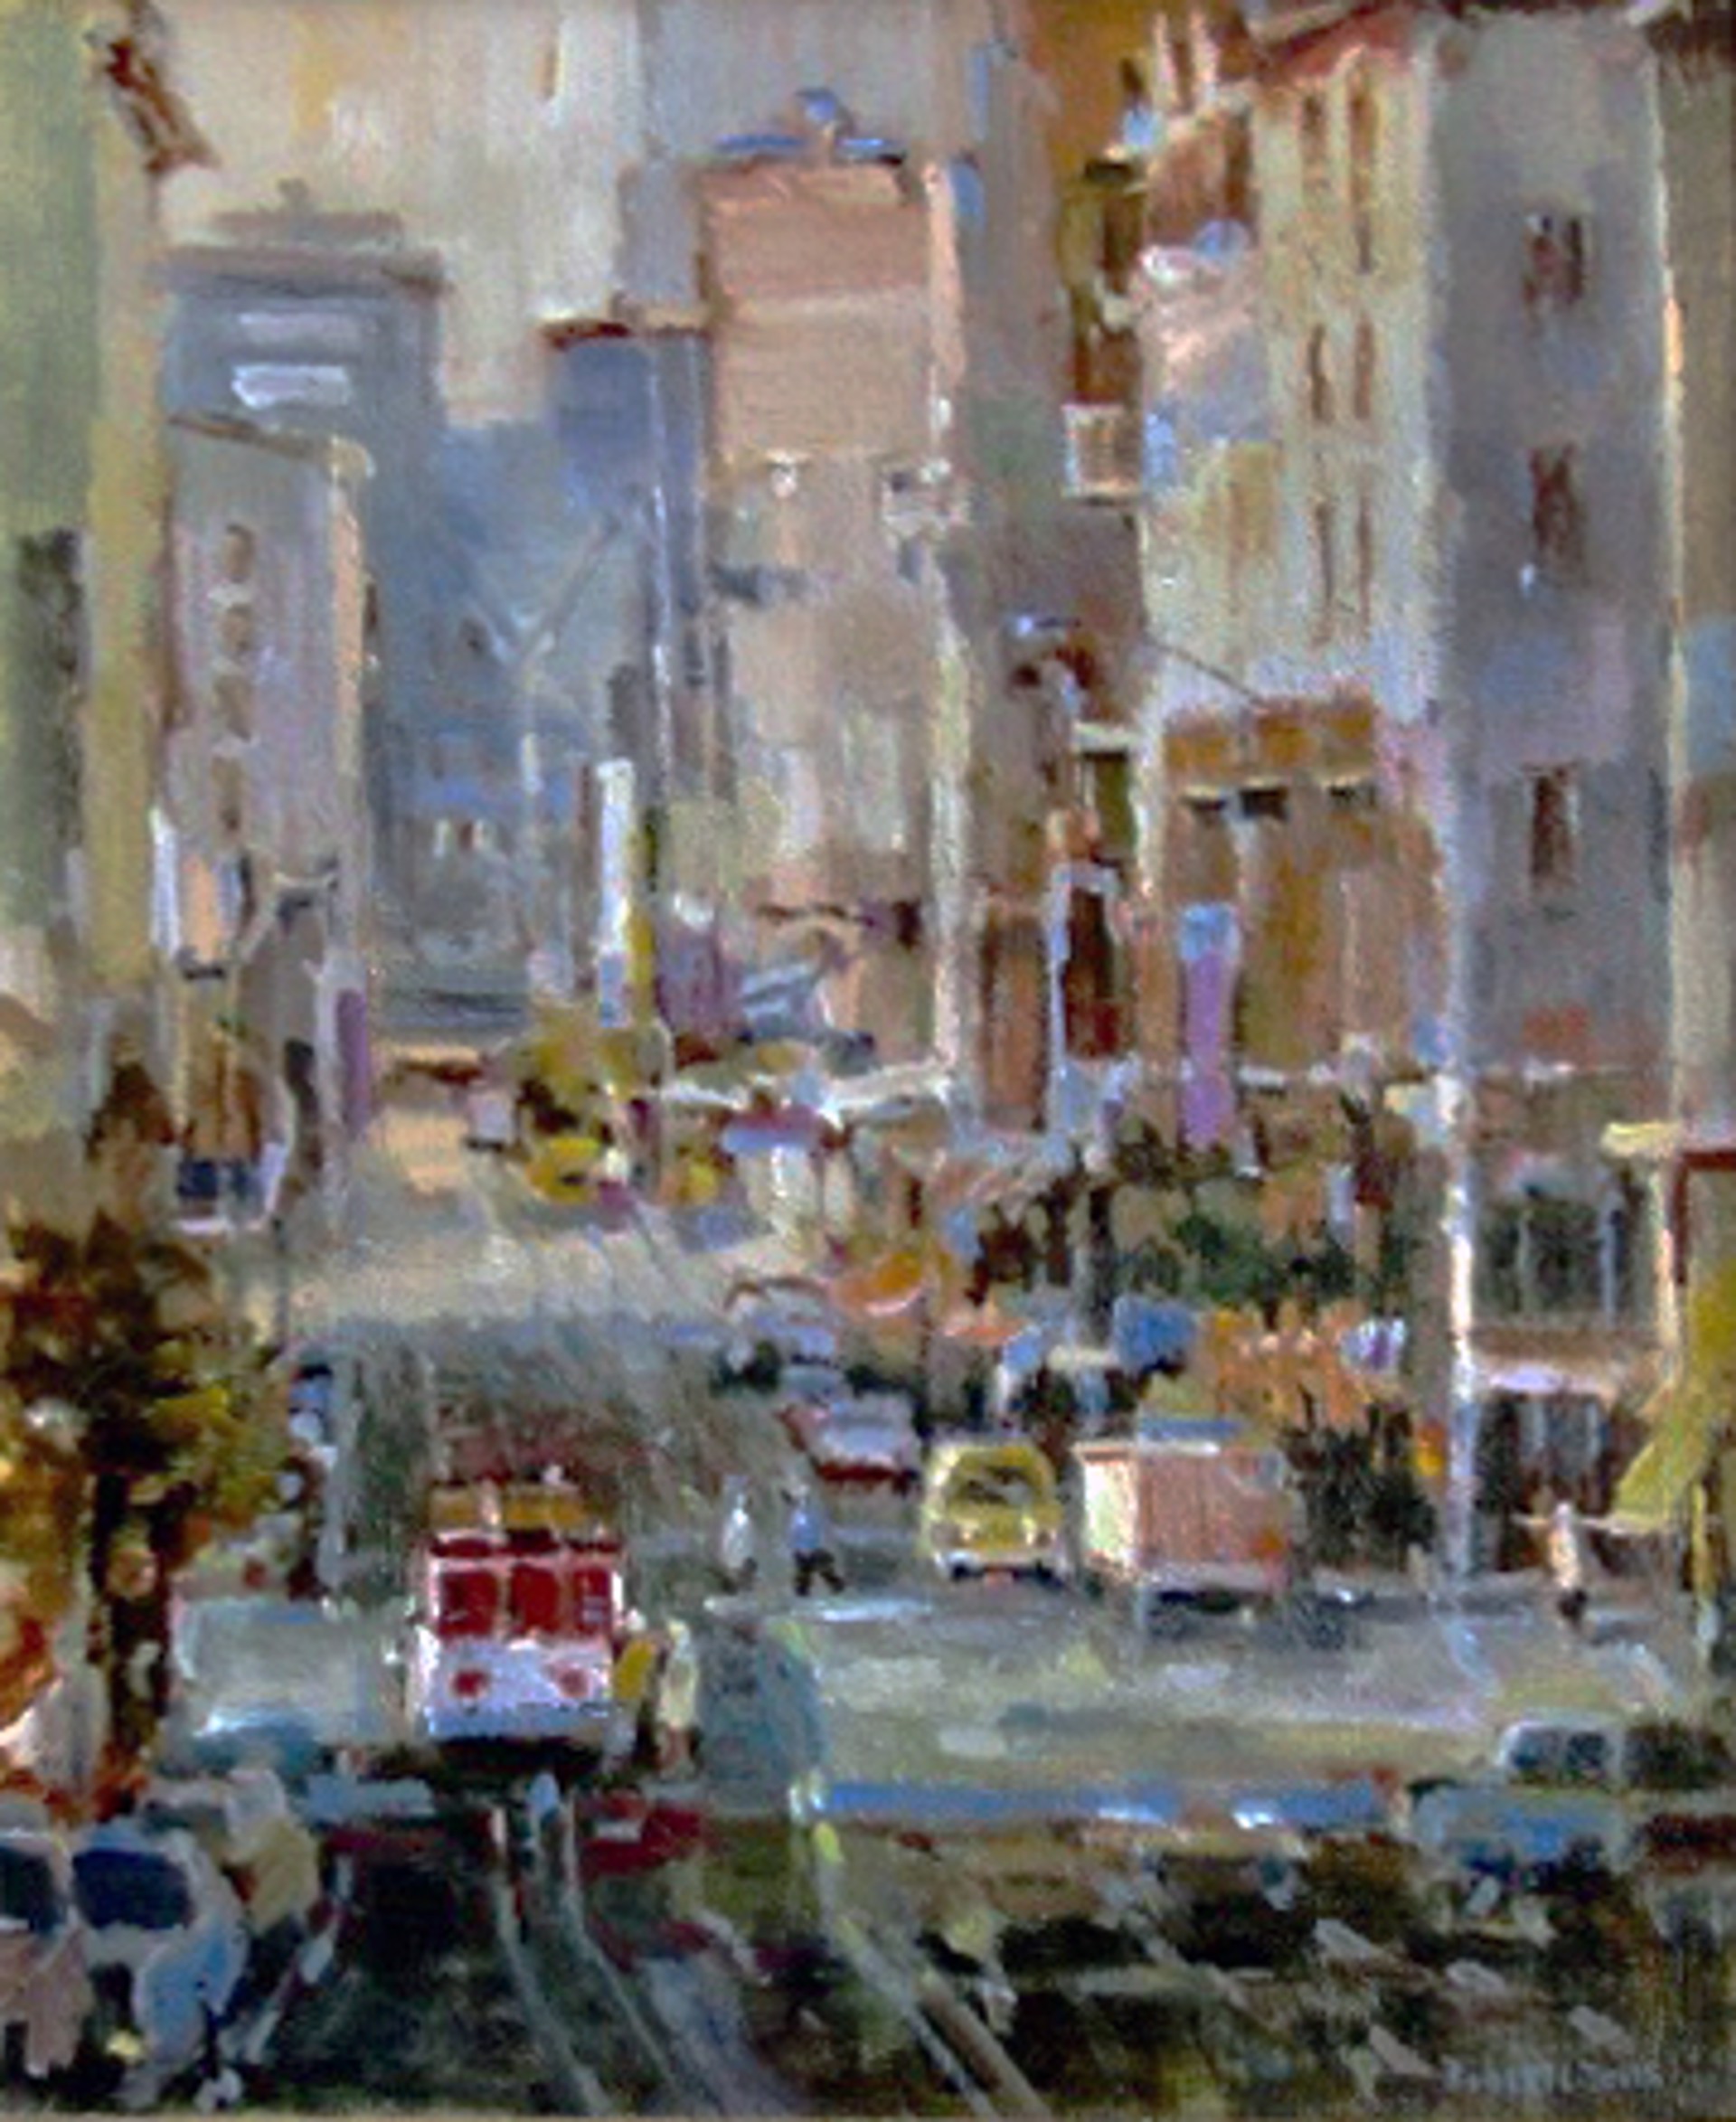 Early Morning in the City by Robert L. Davis